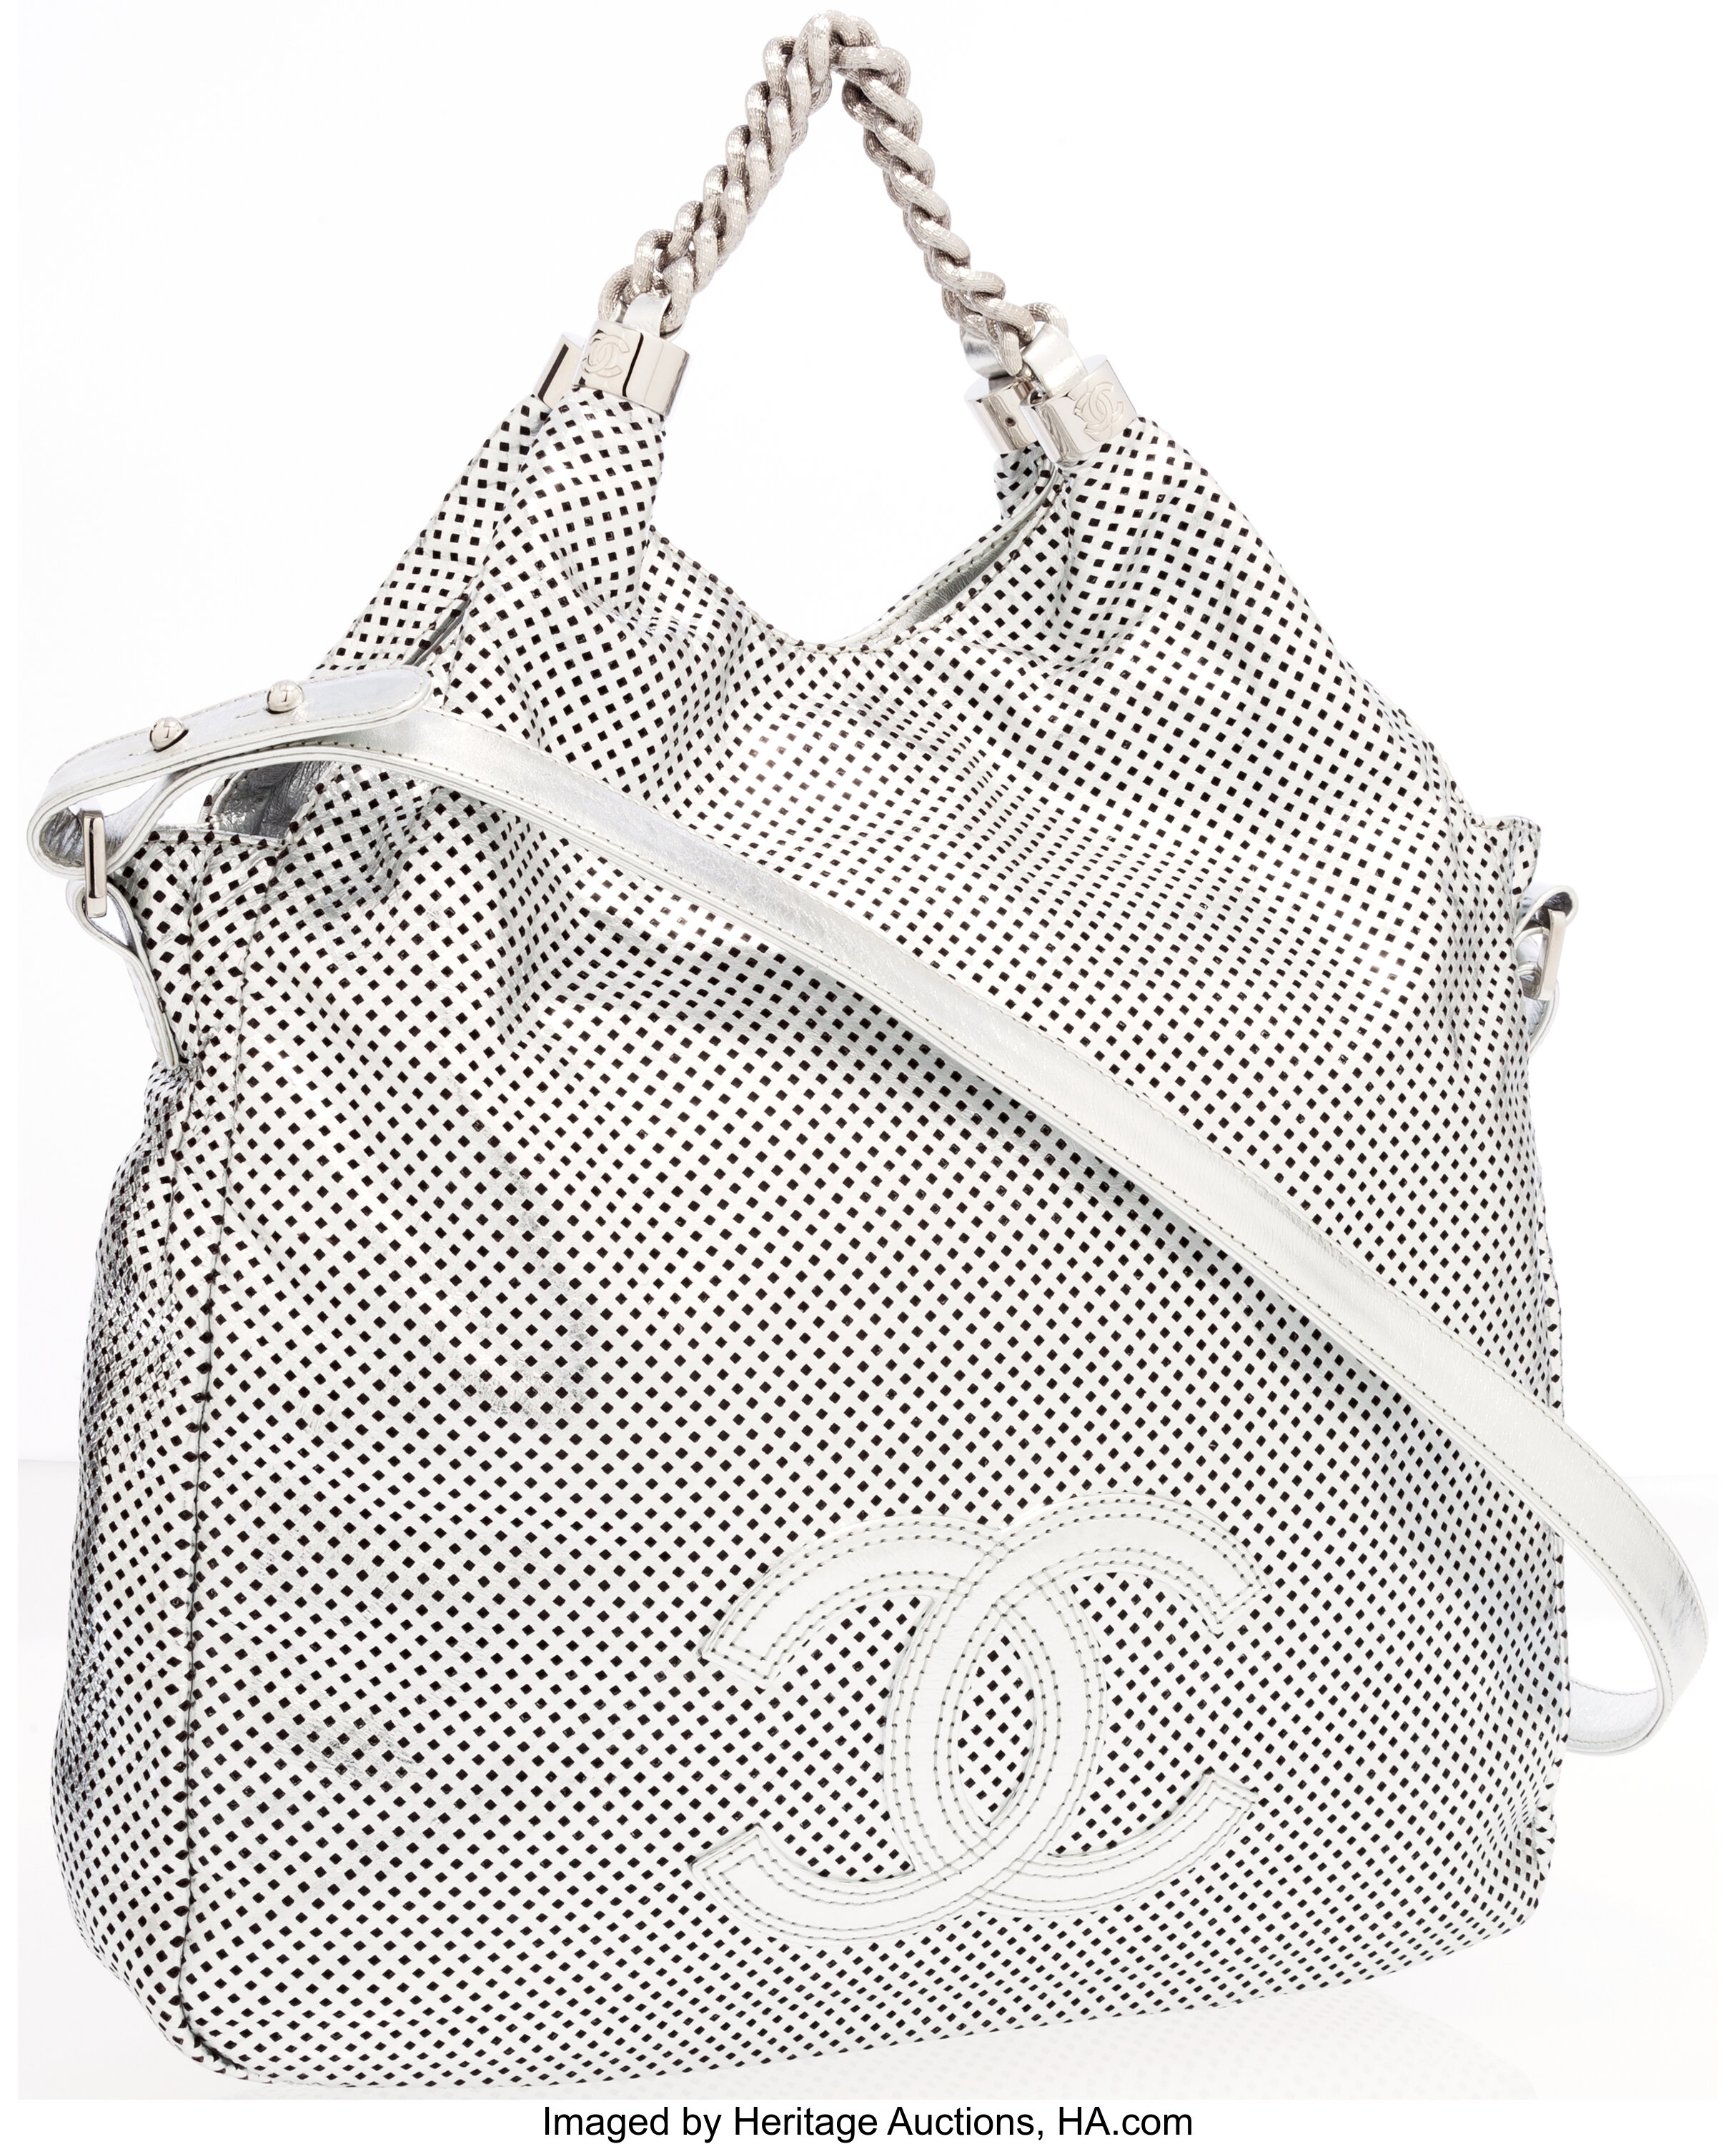 Chanel Perforated Rodeo Drive Flap Bag